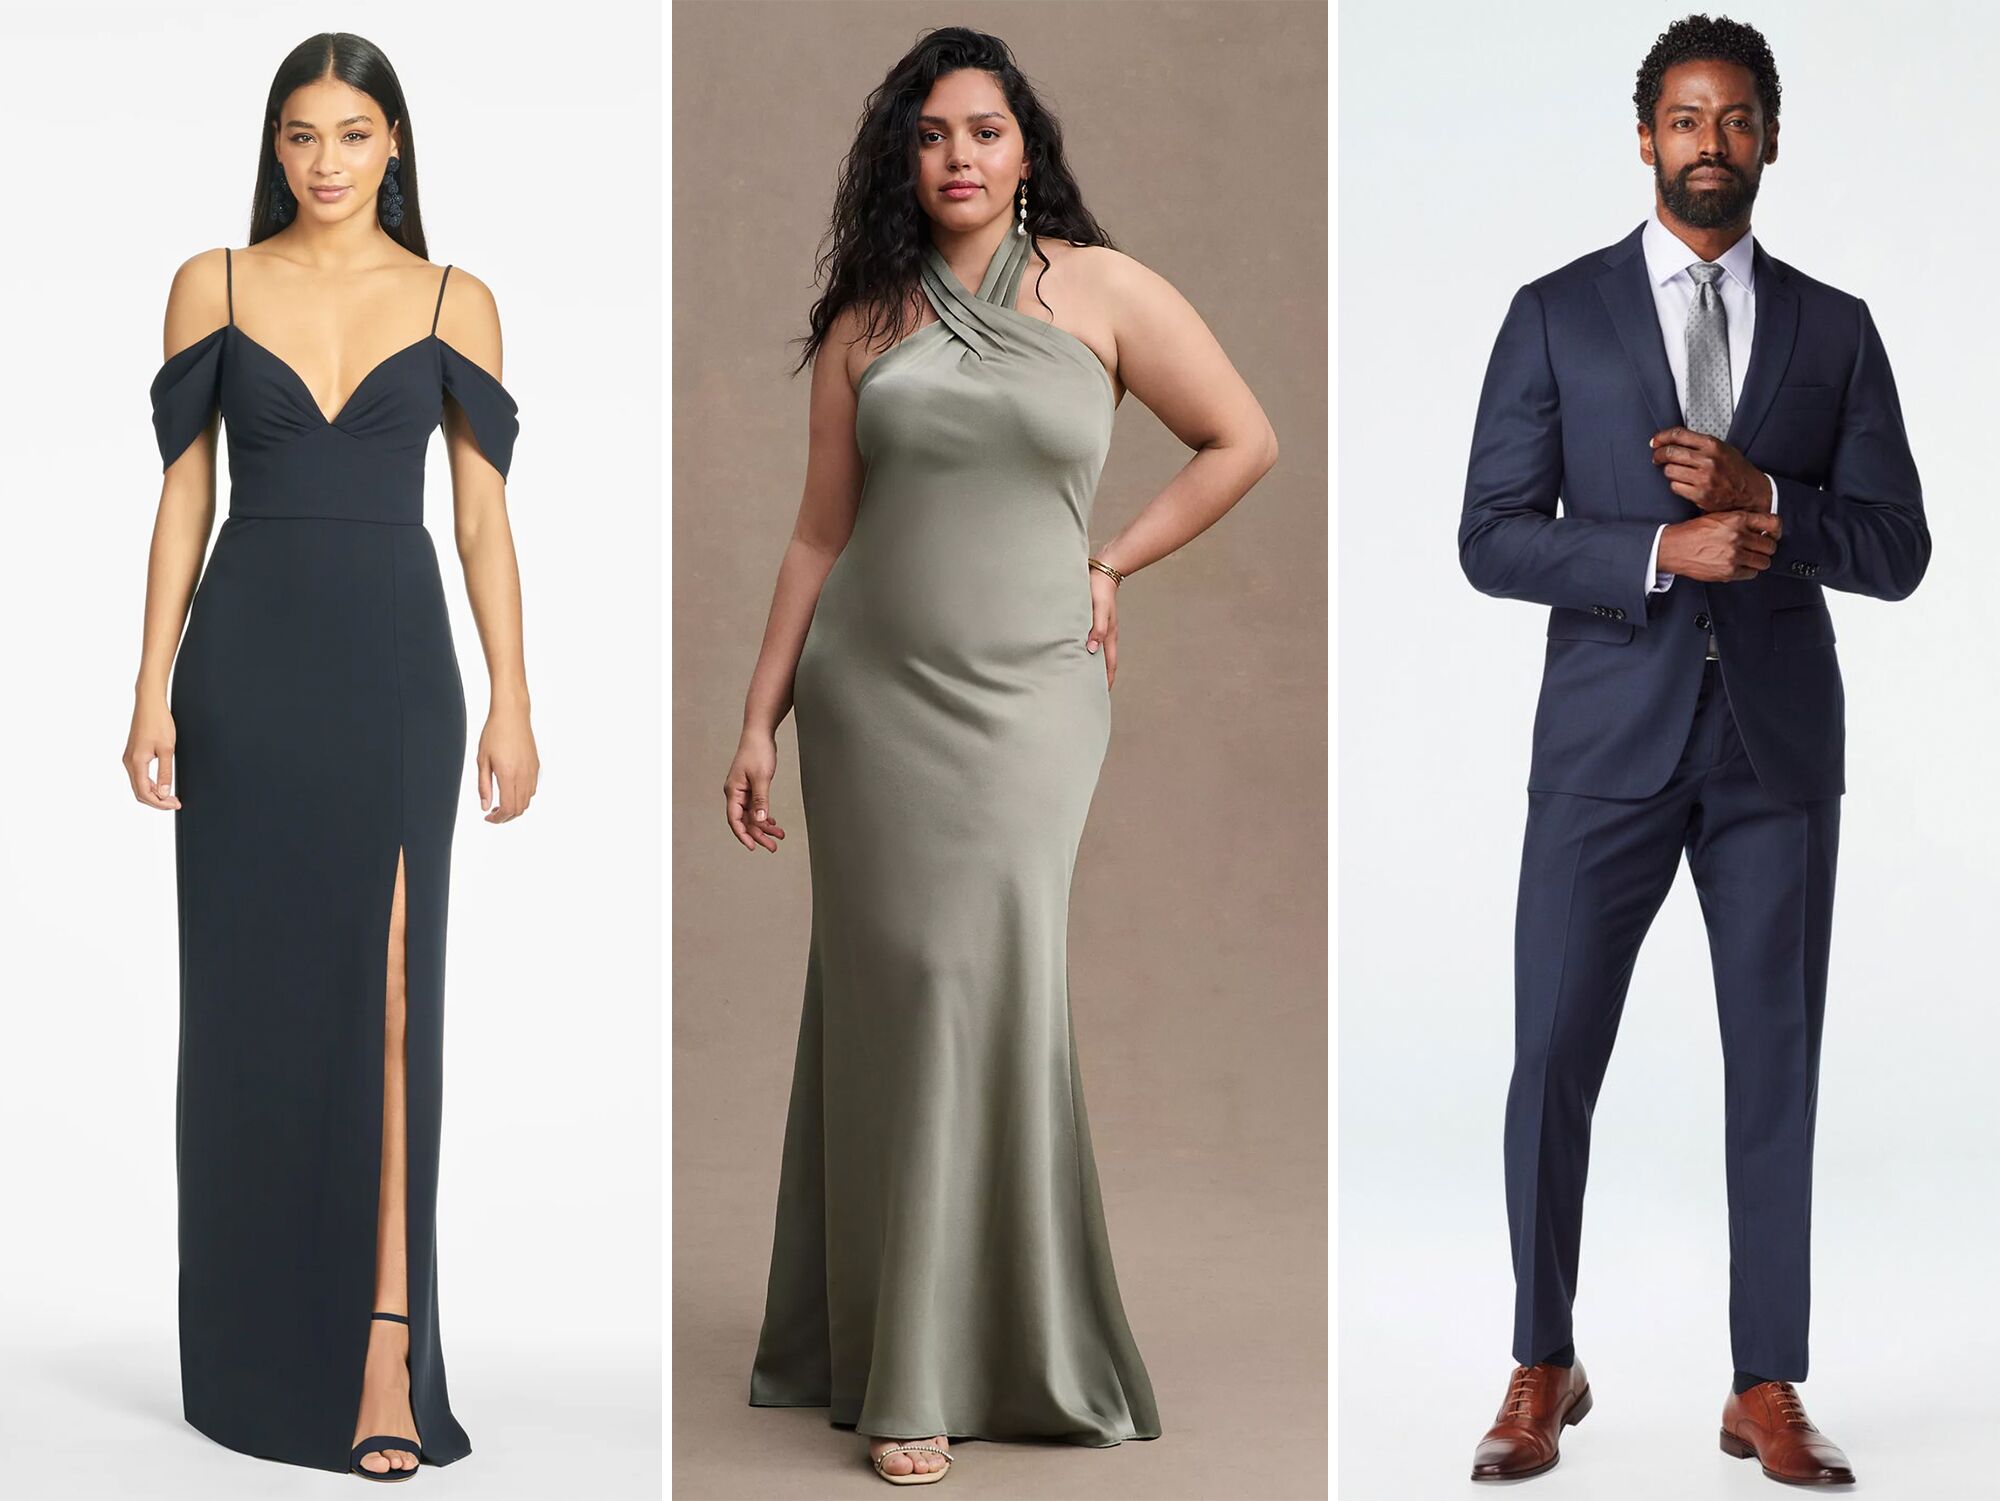 Three formal wedding guest outfits